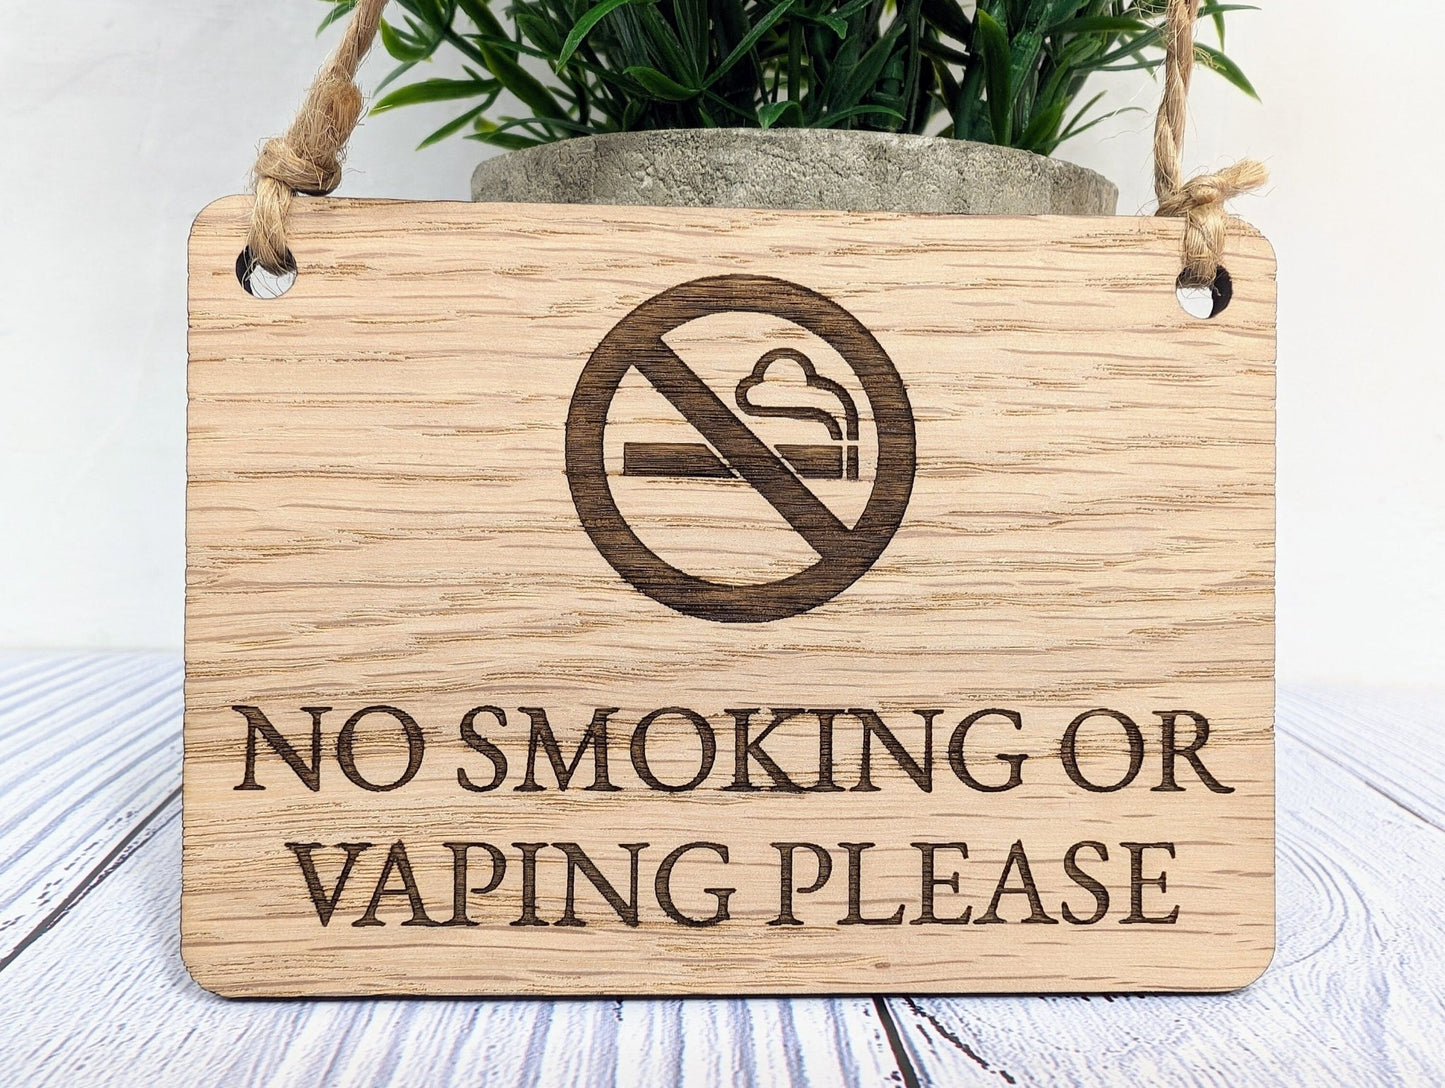 No Smoking or Vaping Please" Wooden Sign | Oak Veneered MDF | 4 Sizes | Handcrafted in Wales | Eco-Friendly - CherryGroveCraft